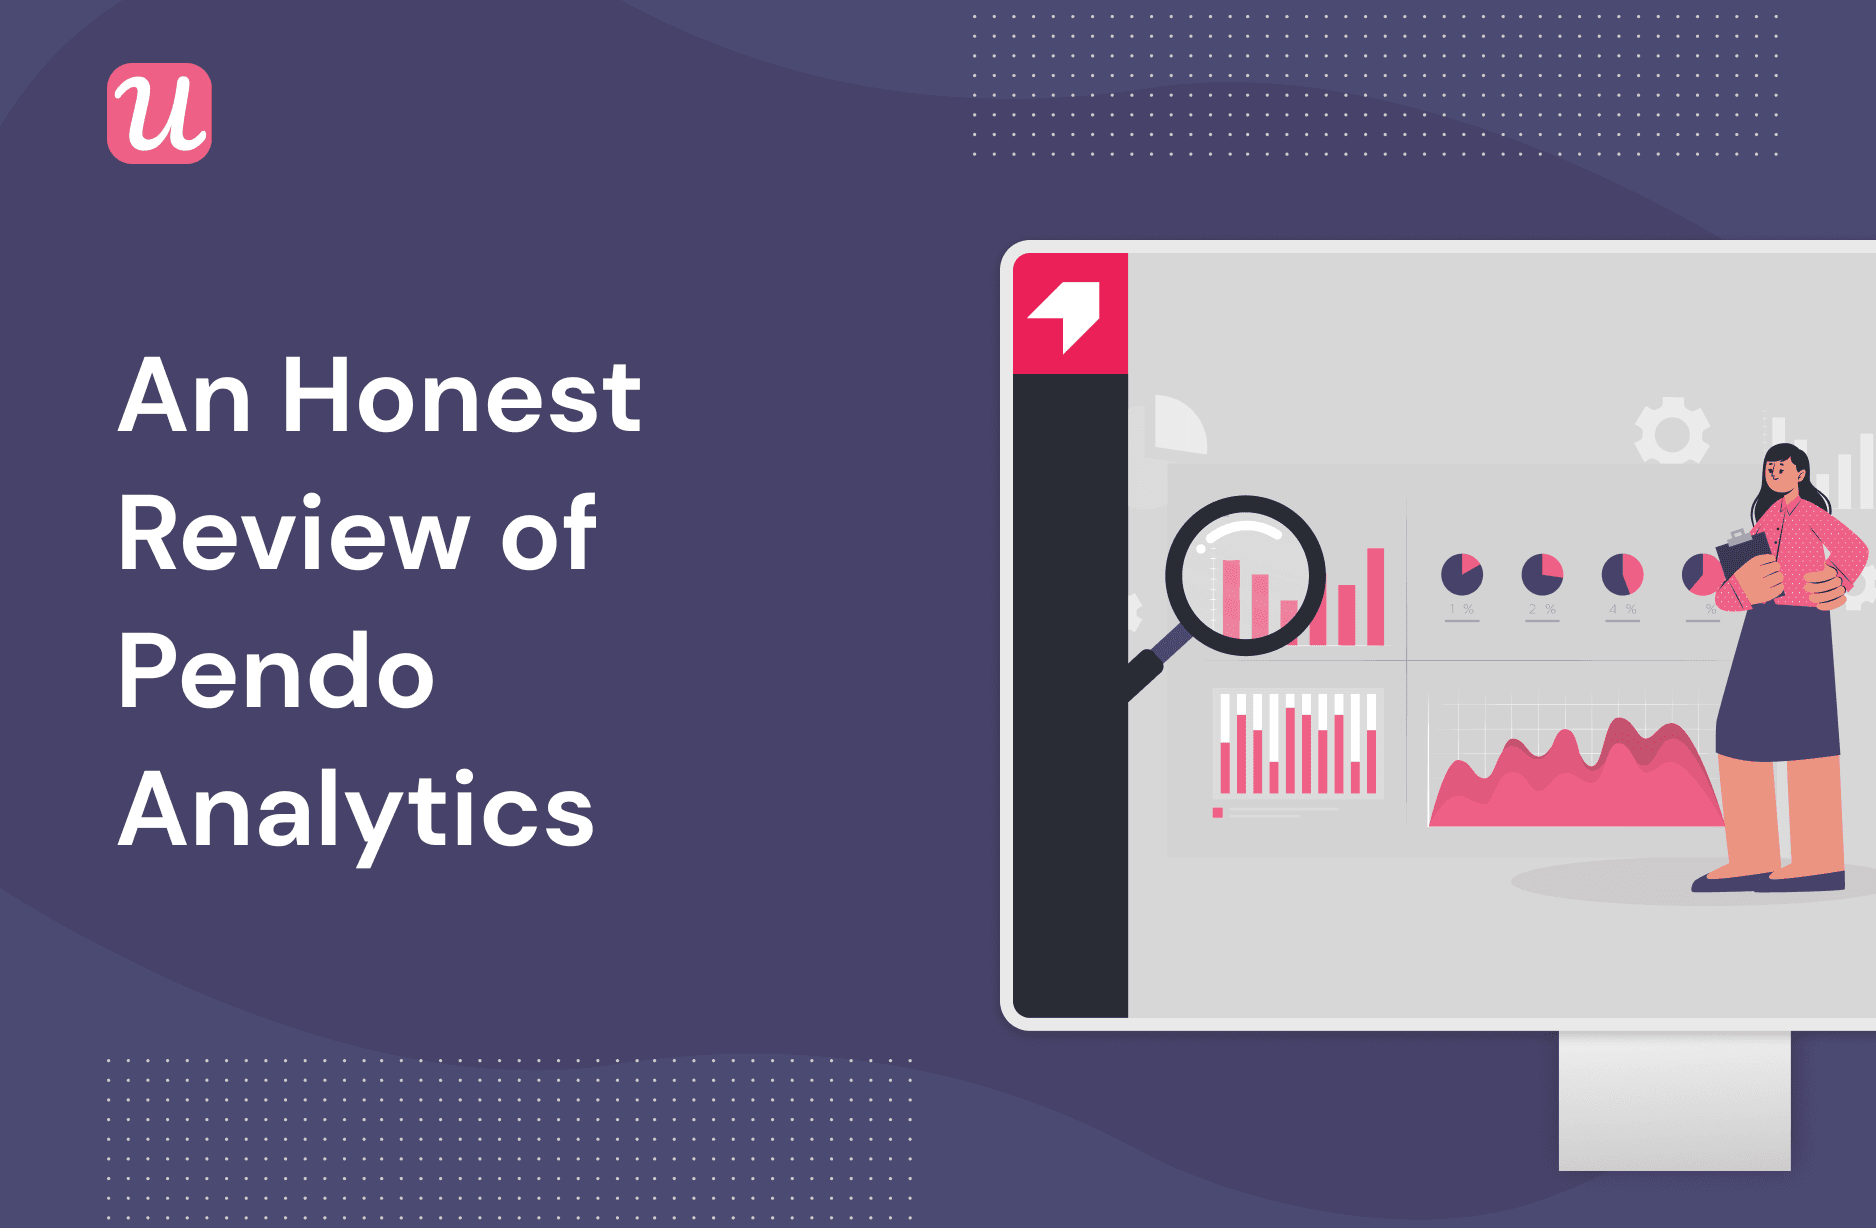 An Honest Review of Pendo Analytics